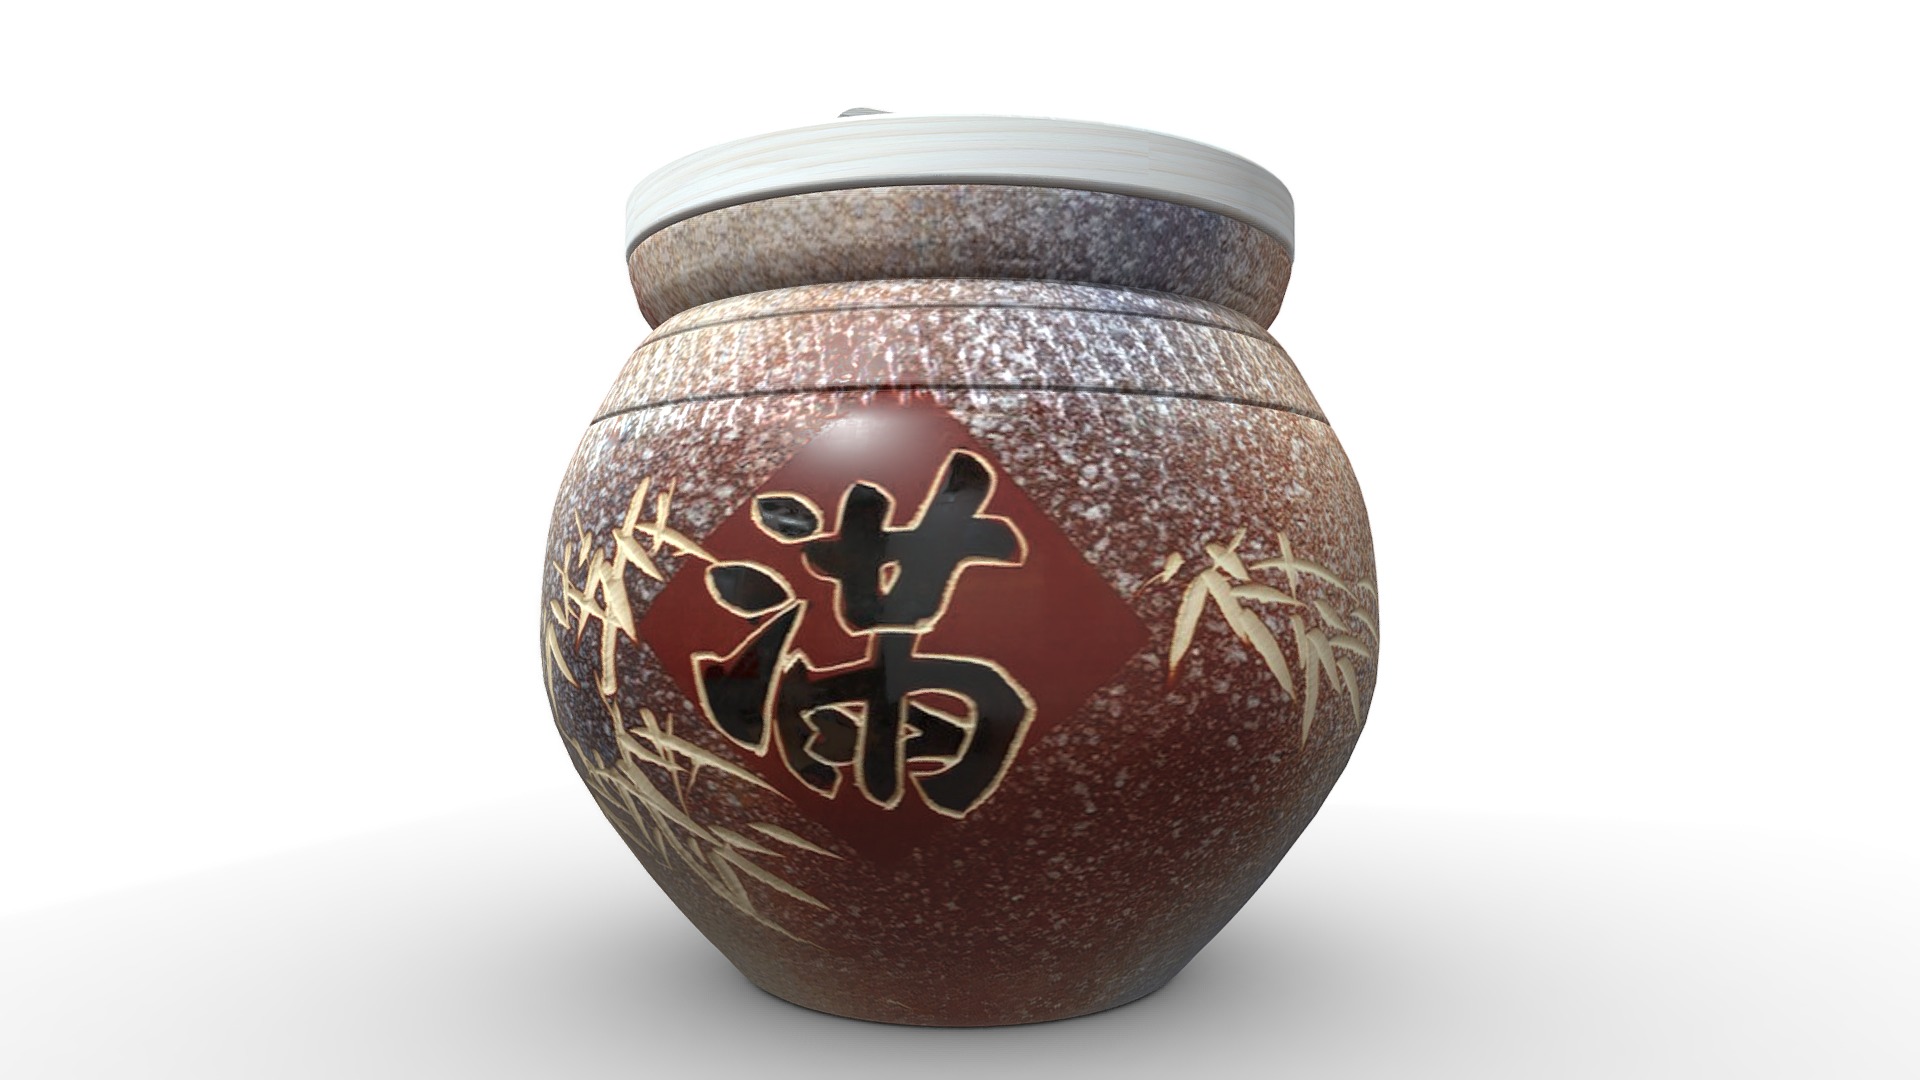 3D model 【3D模擬-上等】10斤彩陶色『 滿竹 』米甕展示 - This is a 3D model of the 【3D模擬-上等】10斤彩陶色『 滿竹 』米甕展示. The 3D model is about a jar with a graphic design on it.